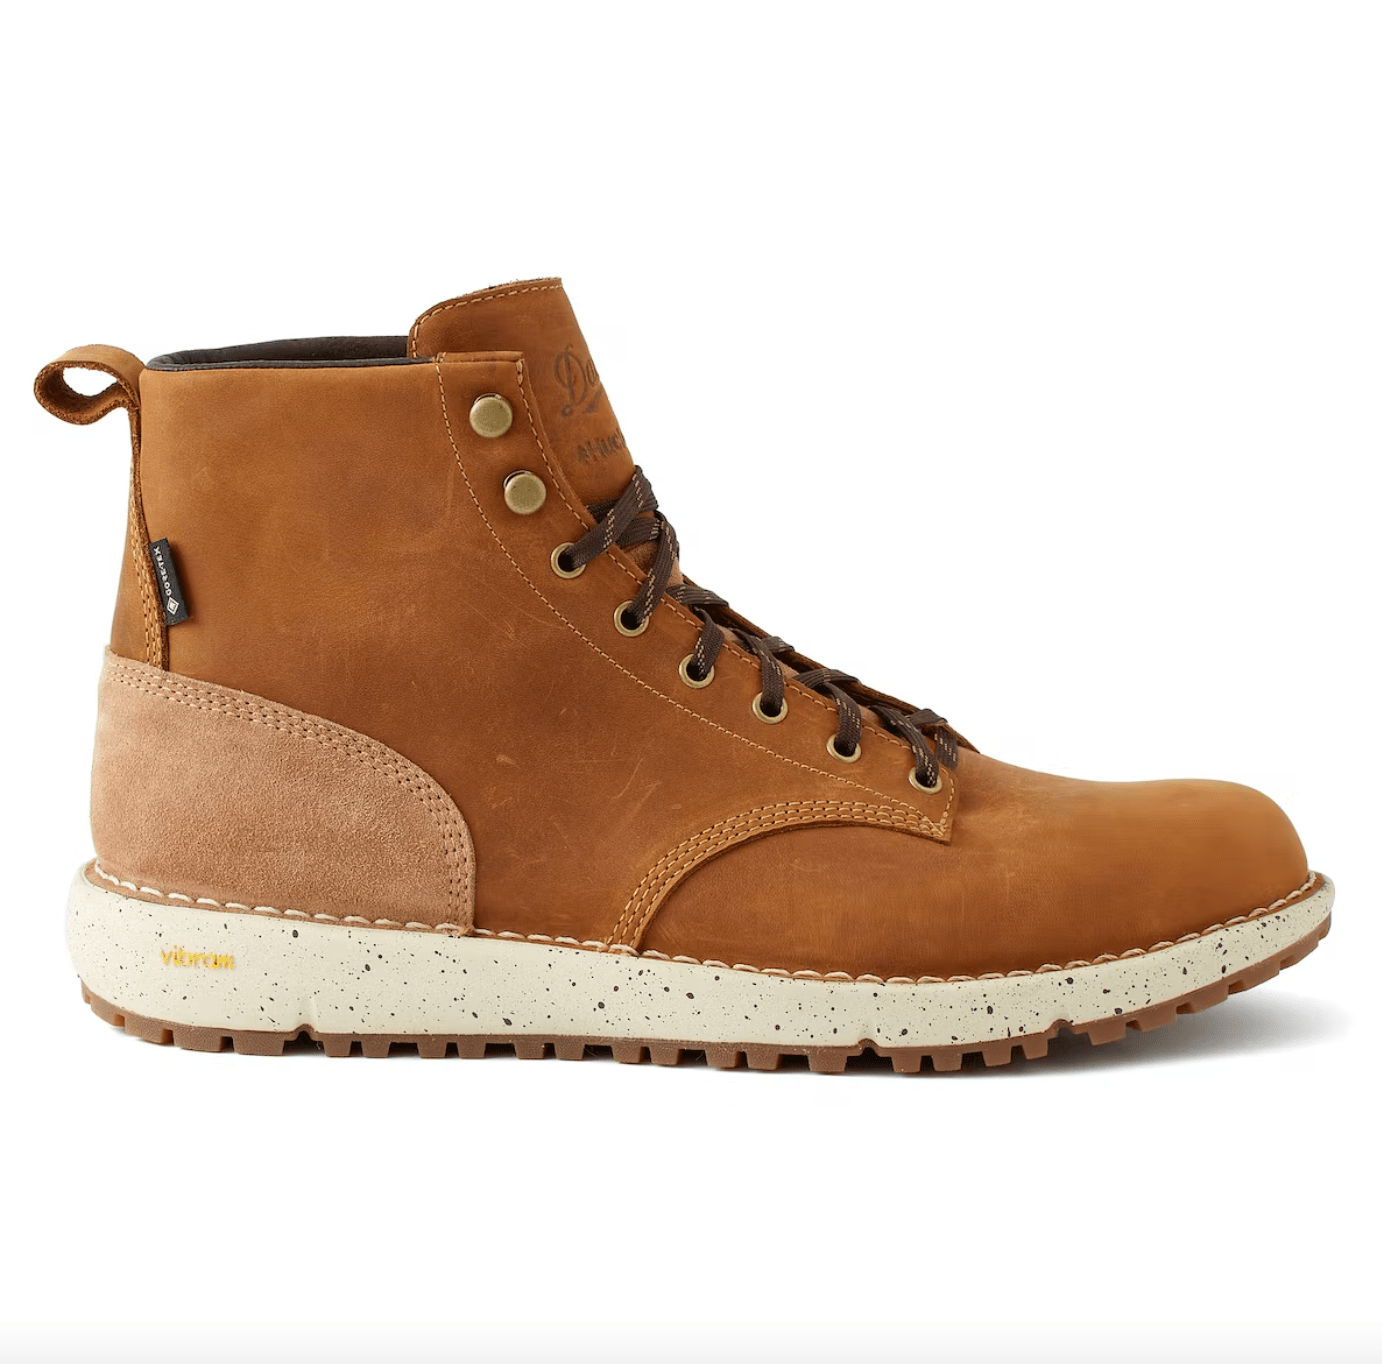 Check Out The New Danner x Huckberry Waxed Canvas Boots - BroBible